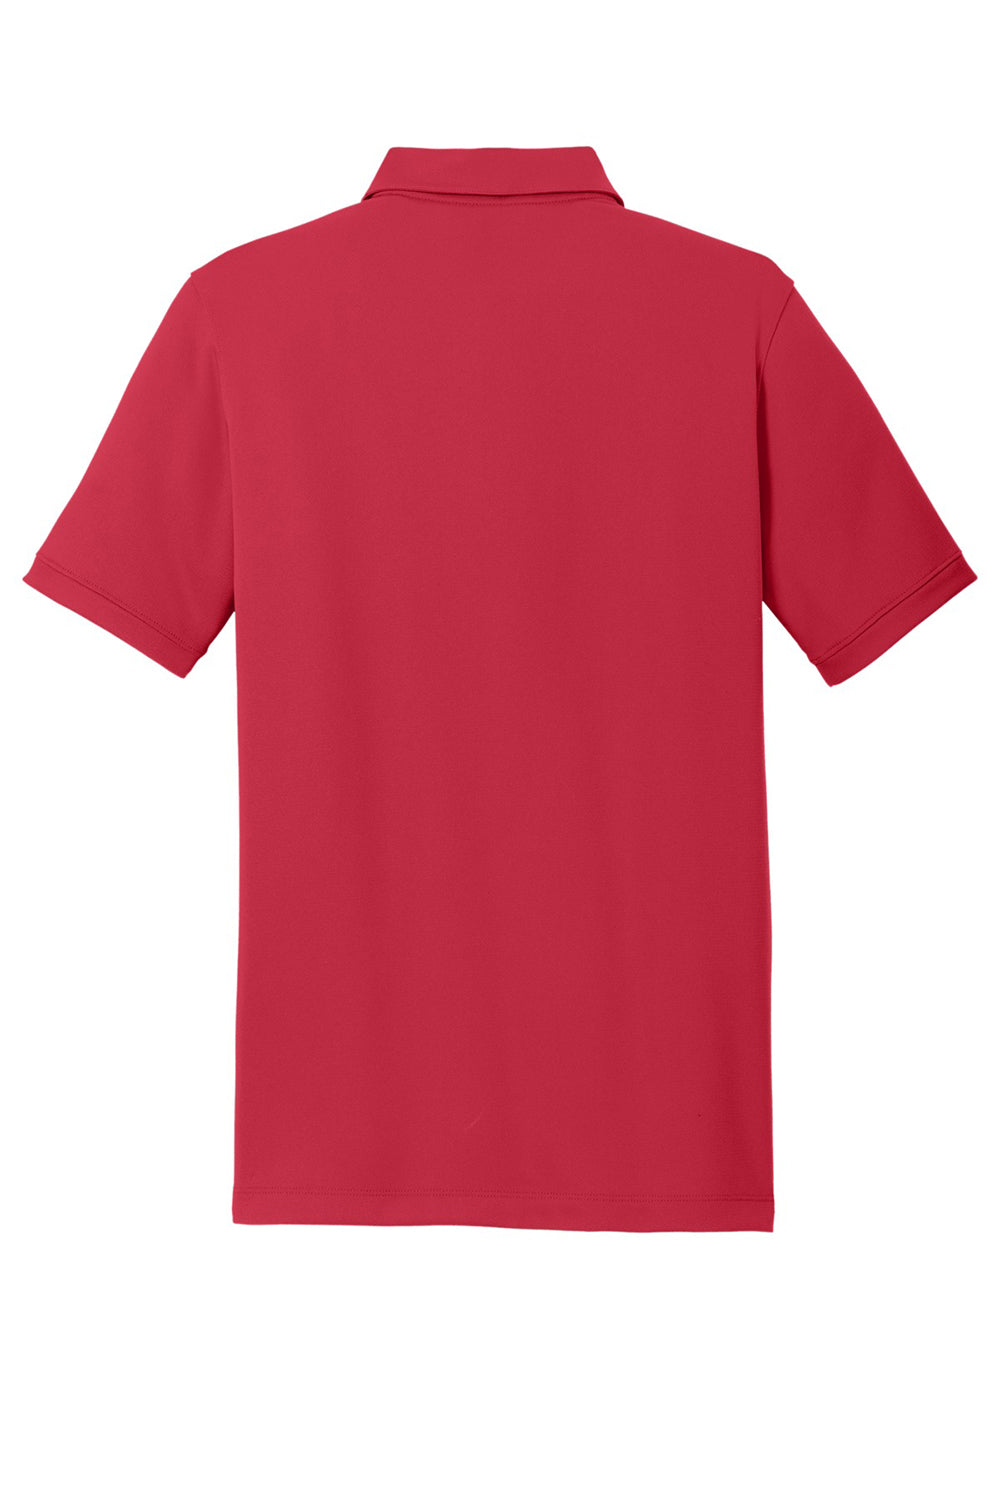 Nike 746099 Mens Icon Dri-Fit Moisture Wicking Short Sleeve Polo Shirt Gym Red Flat Back